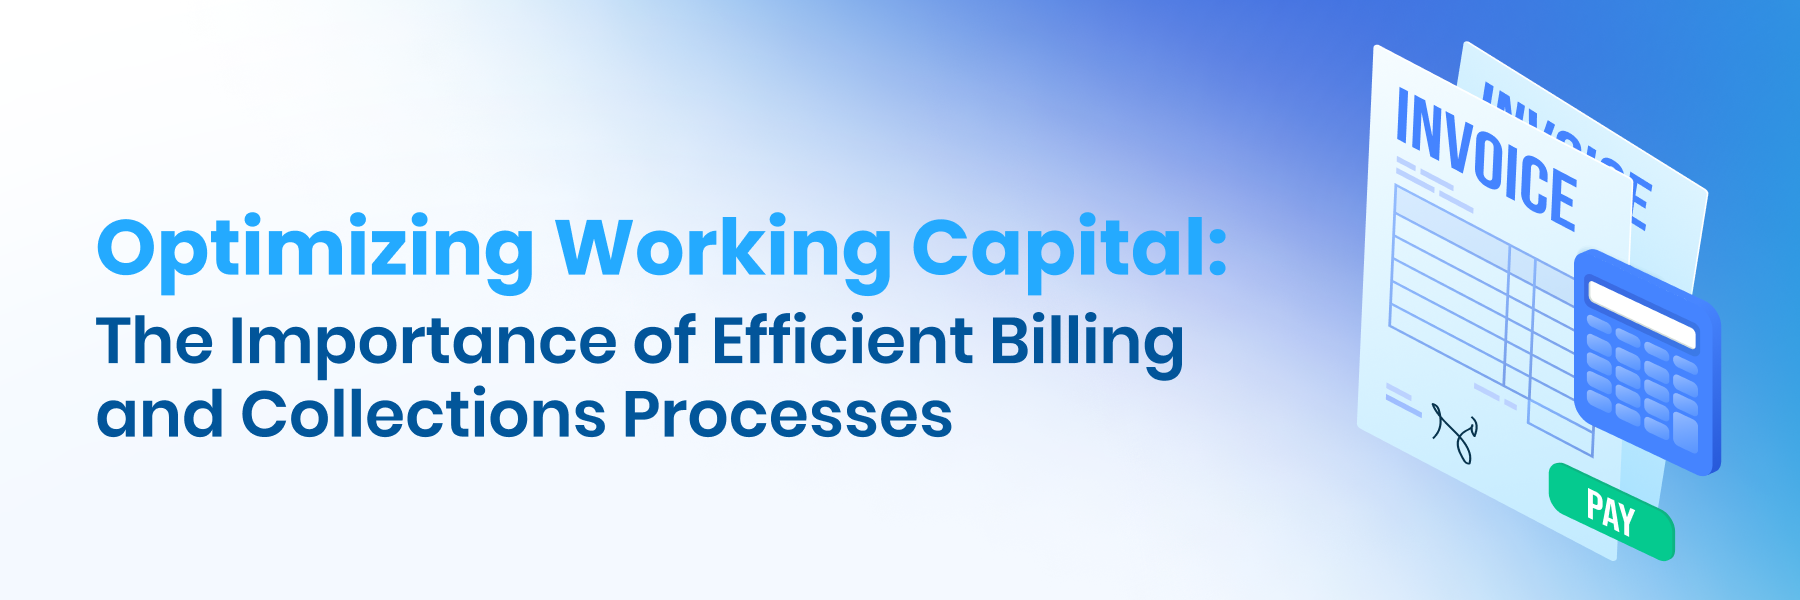 Optimizing Working Capital: The Importance of Efficient Billing and Collections Processes